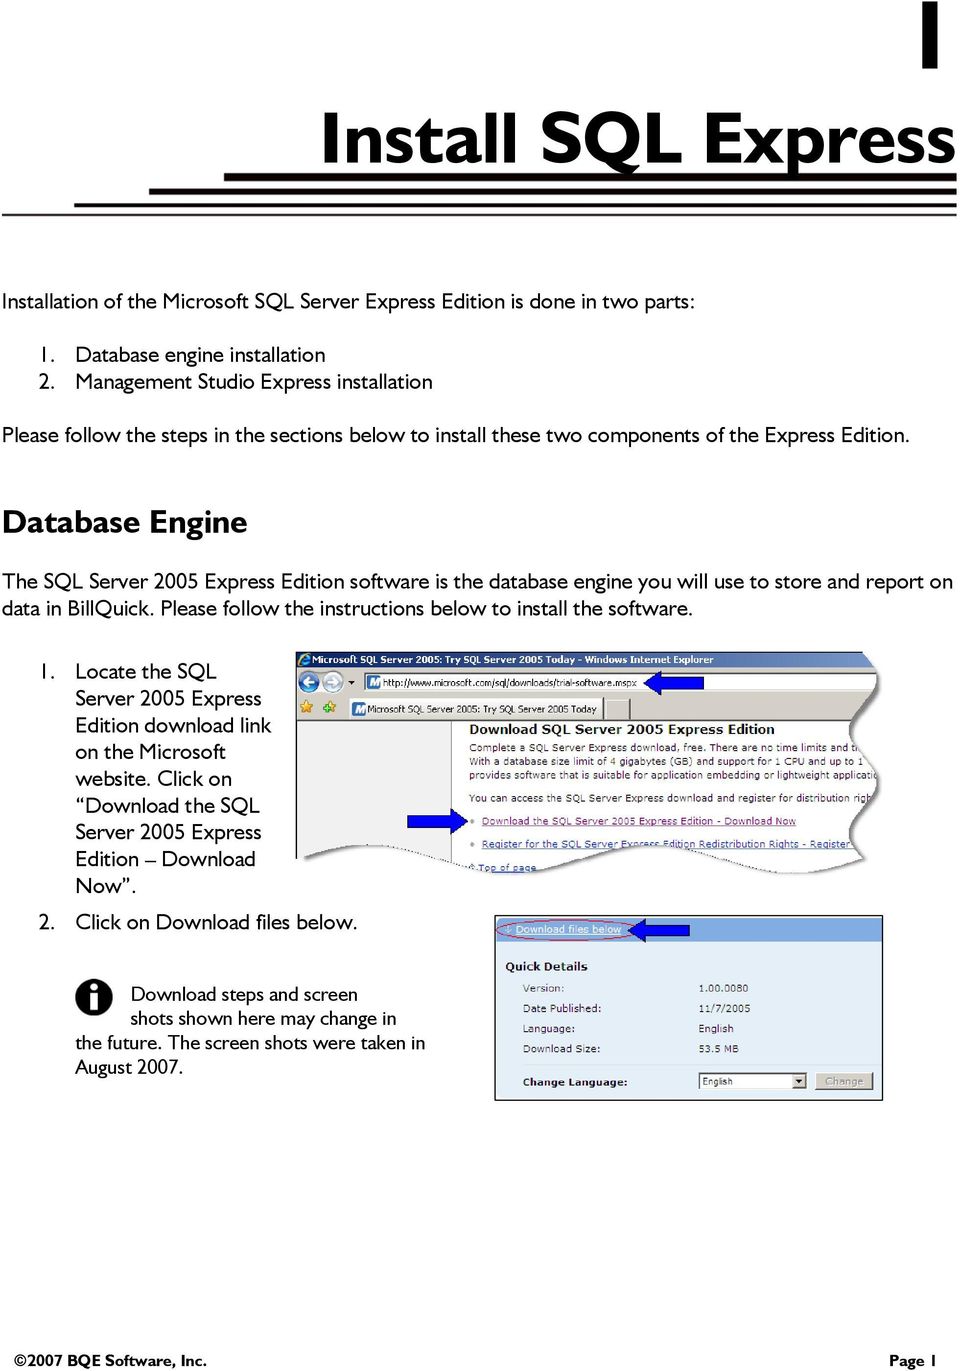 Database Engine The SQL Server 2005 Express Edition software is the database engine you will use to store and report on data in BillQuick. Please follow the instructions below to install the software.